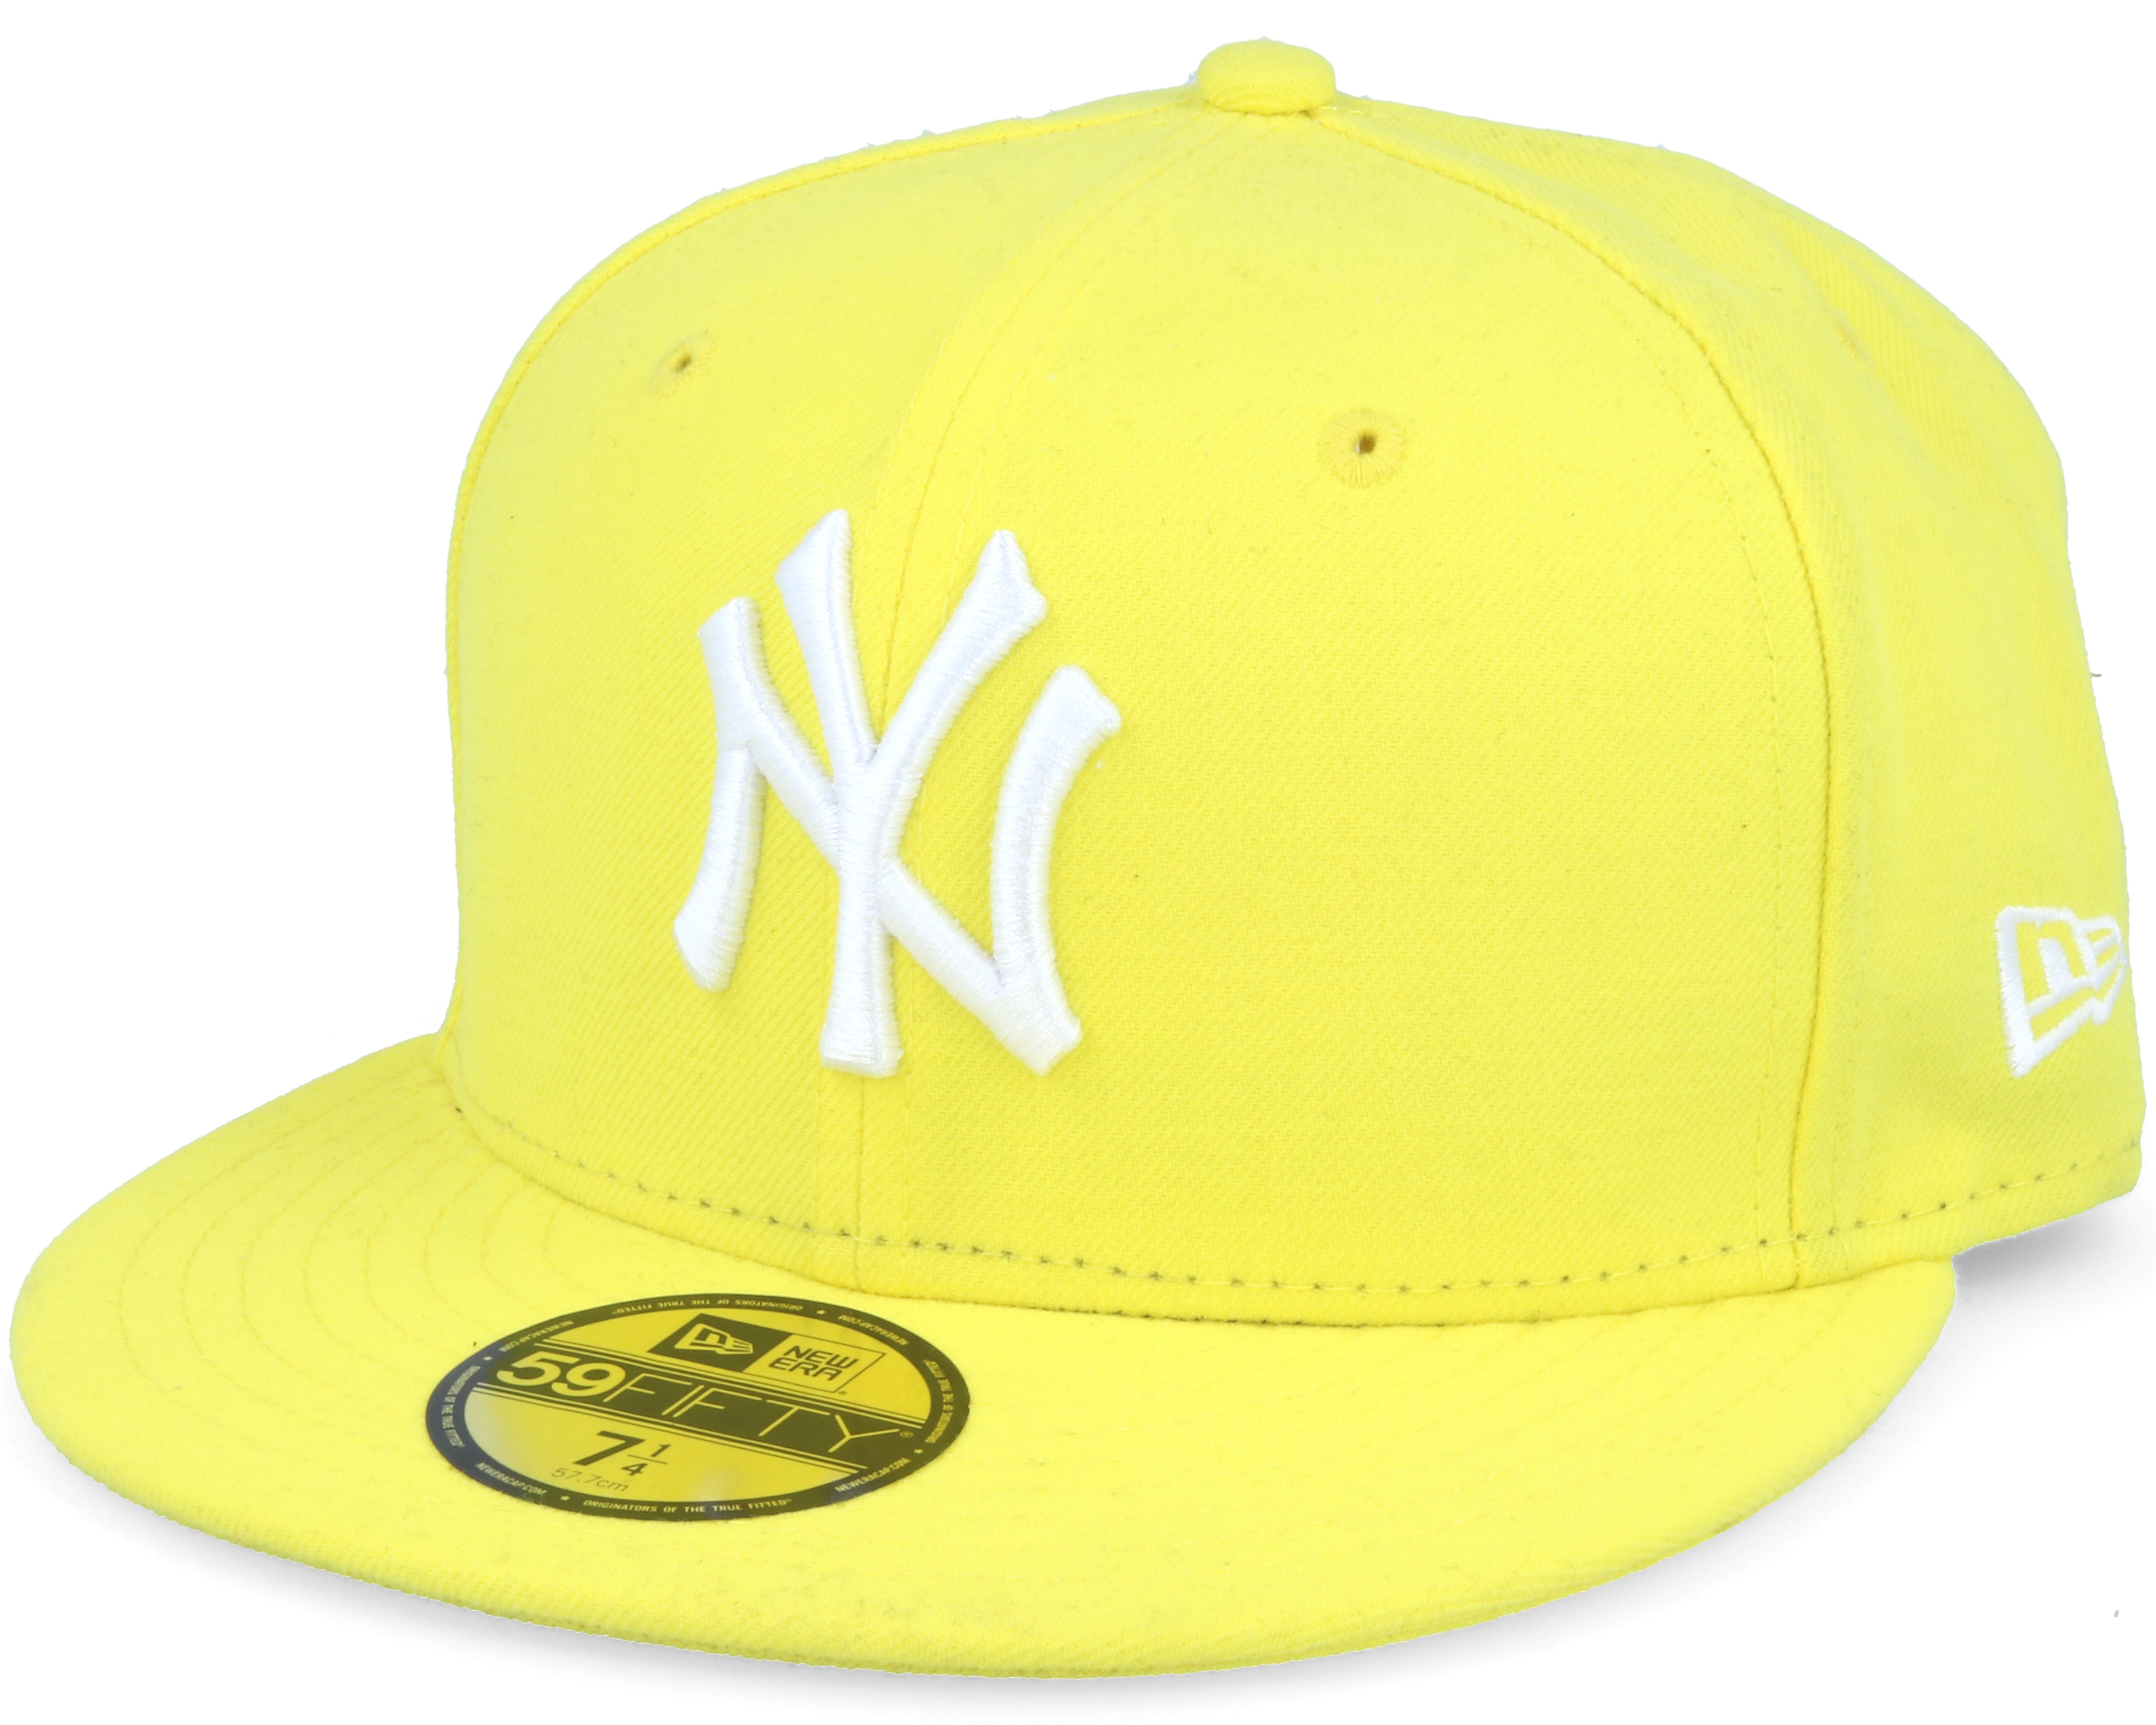 NY Yankees MLB Basic Yellow 59fifty Fitted - New Era 棒球帽 | Hatstore.com